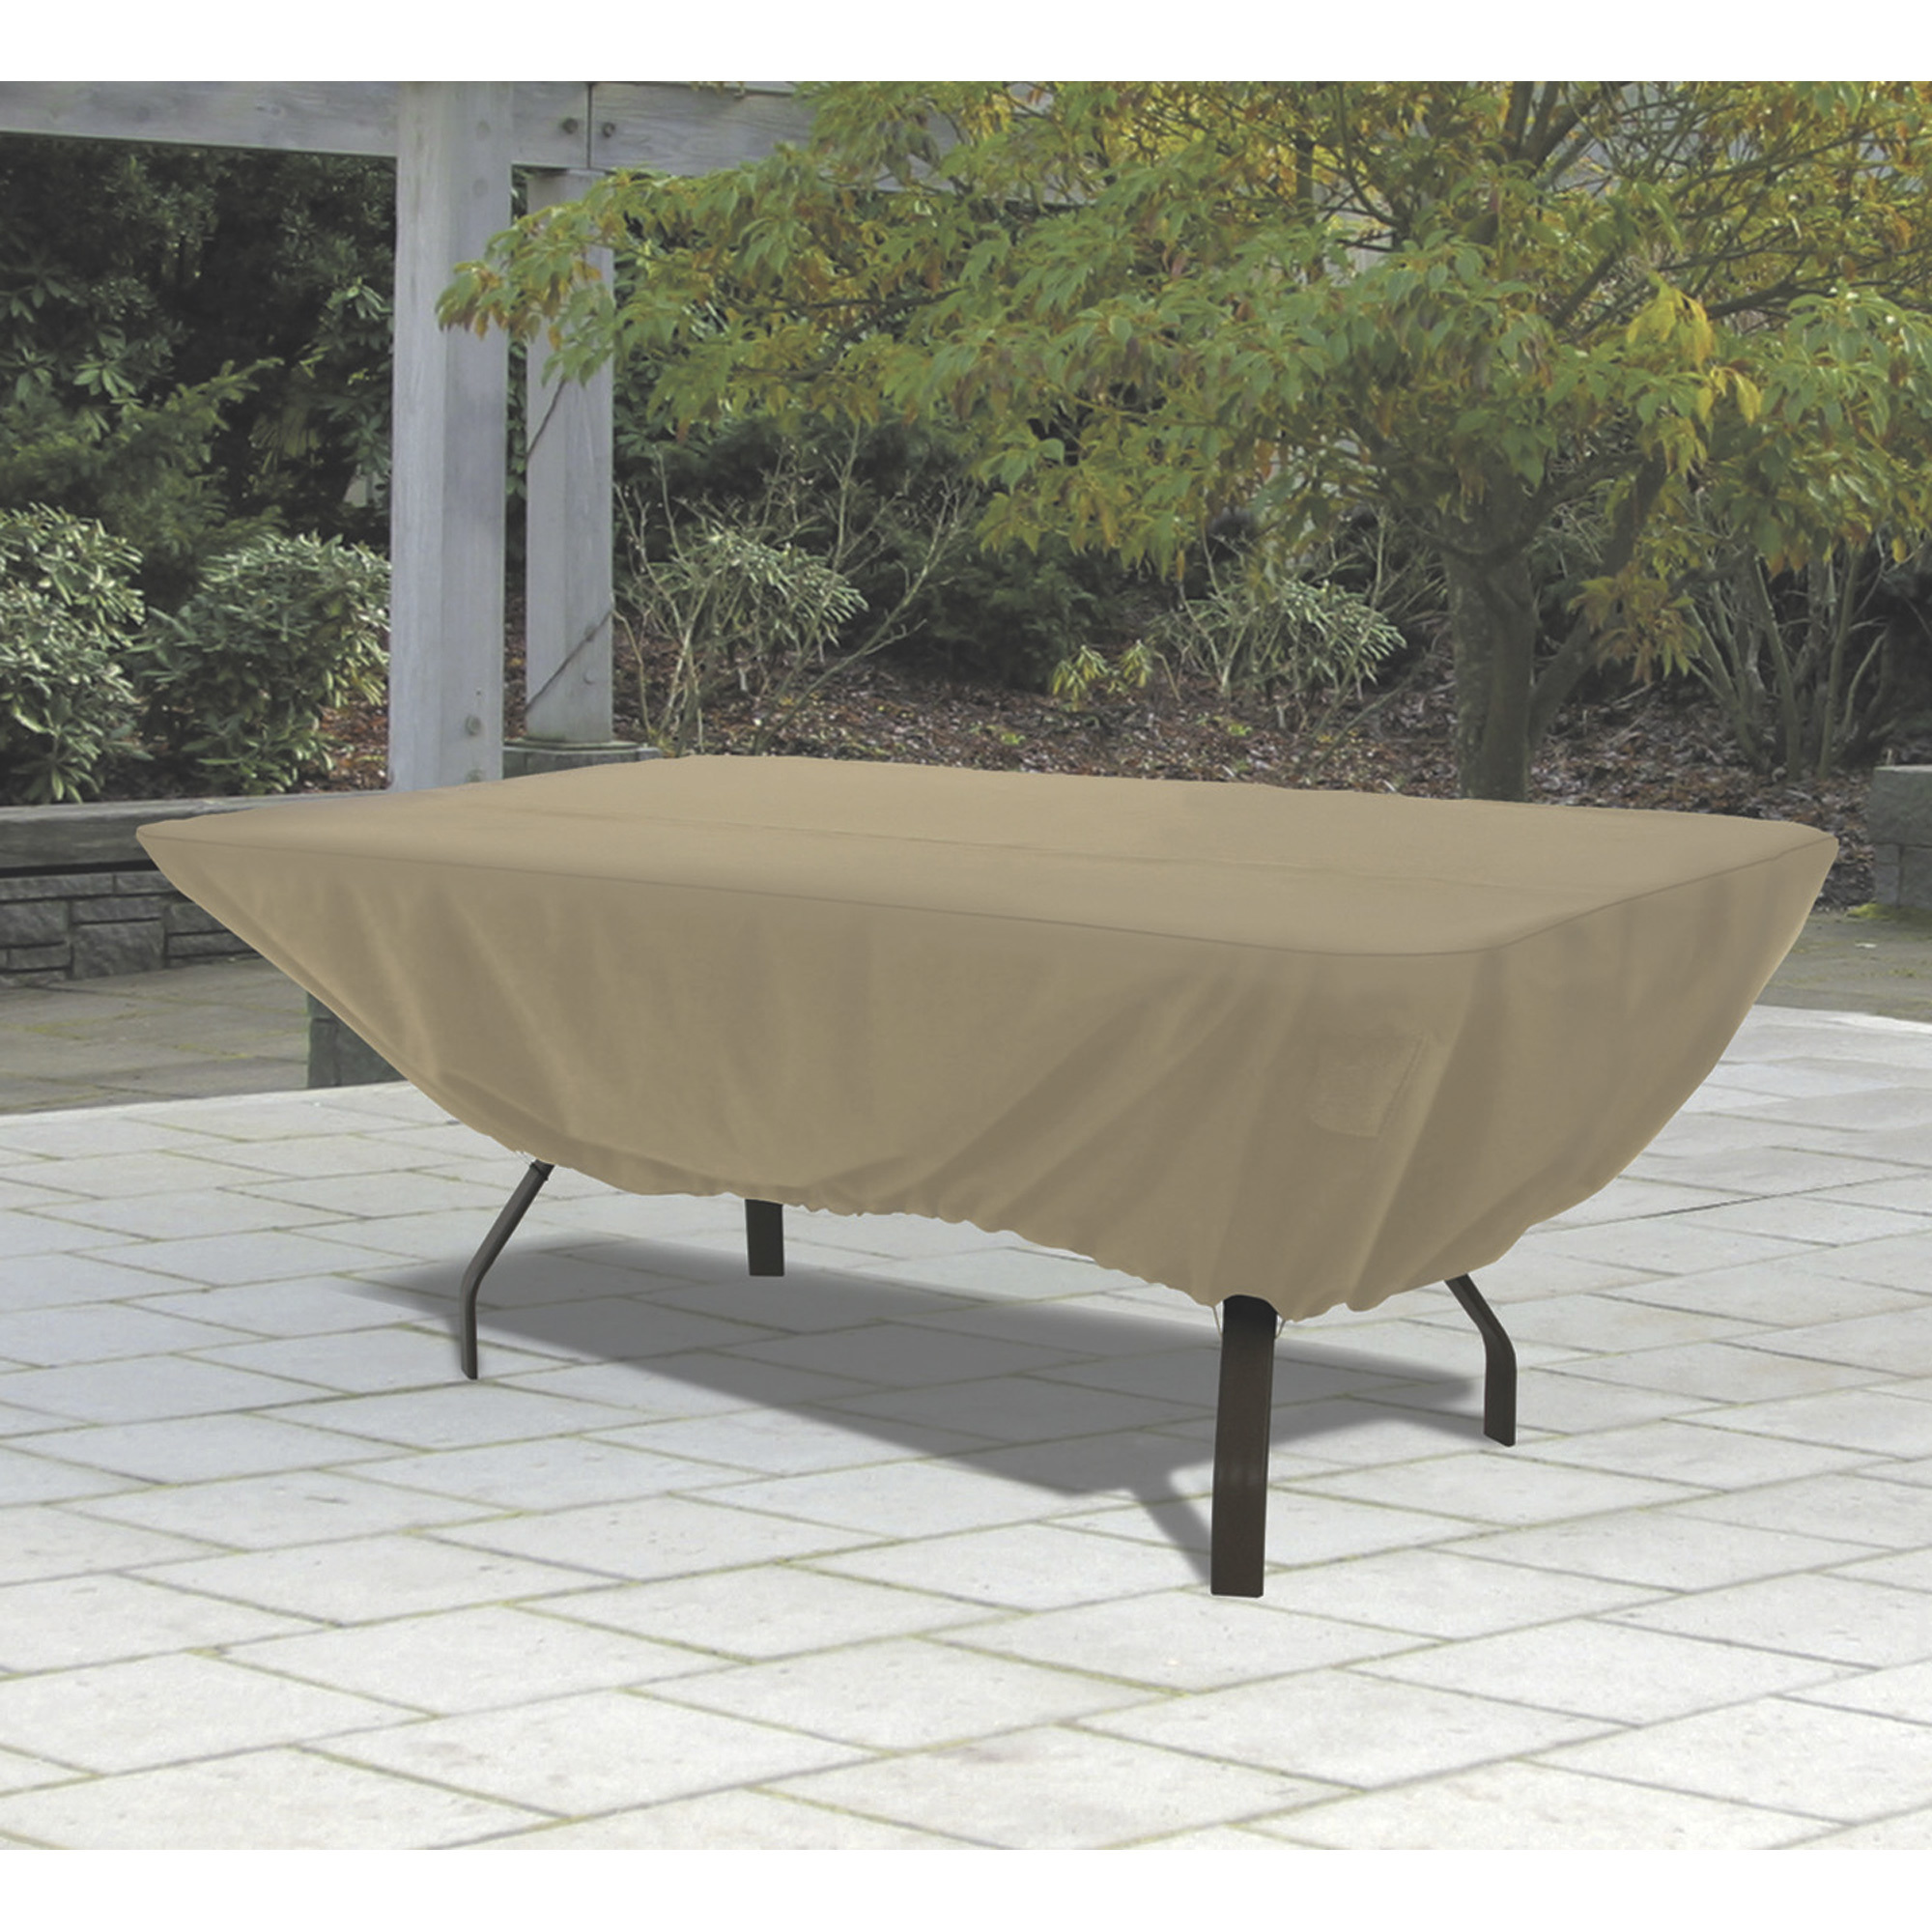 Classic Accessories Terrazzo Rectangular/Oval Patio Table Cover, All Weather Protection Outdoor Furniture Cover, Sand, 72Inch L x 44Inch W x 23Inch H,